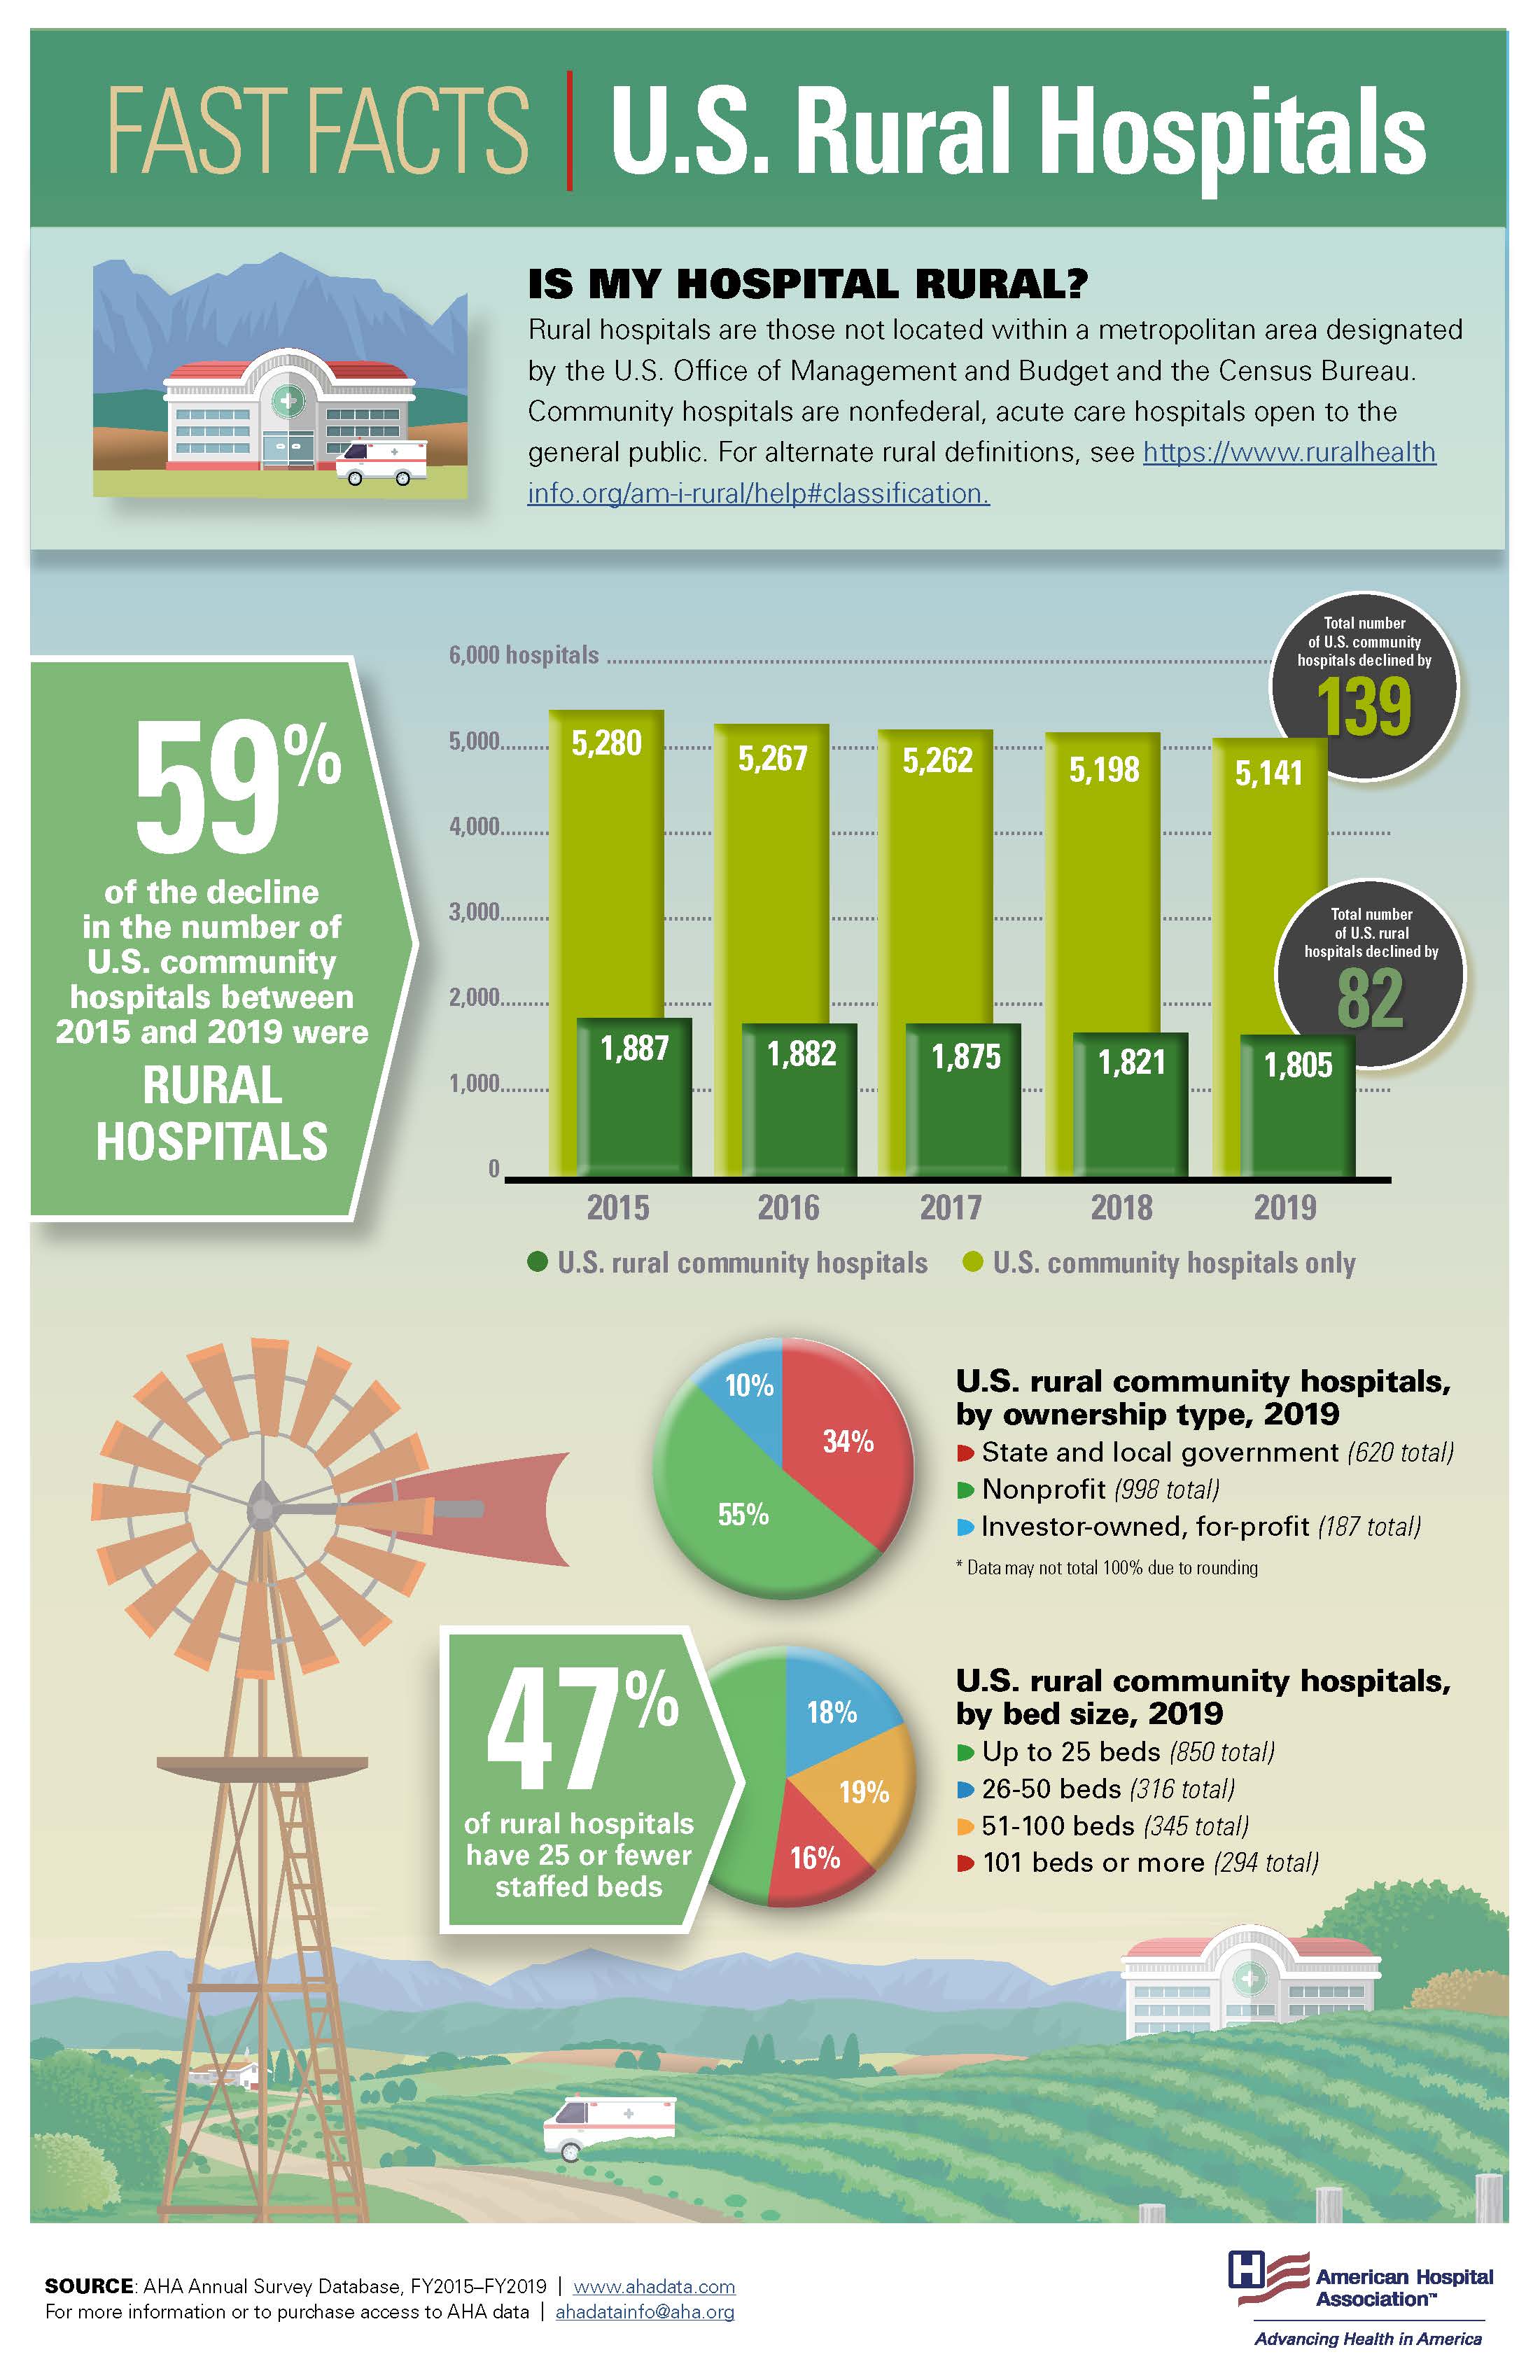 Fast Facts: U.S. Rural Hospitals infographic. IS MY HOSPITAL RURAL? Rural hospitals are those not located within a metropolitan area designated by the U.S. Office of Management and Budget and the Census Bureau. Community hospitals are nonfederal, acute care hospitals open to the general public. For alternate rural definitions, see https://www.ruralhealthinfo.org/am-i-rural/help#classification. 59% of the decline in the number of U.S. communityt hospitals between 2015 and 2019 were rural hospitals. Total number of U.S. community hospitals declined by 139 from 2015 to 2019. Total number of U.S. rural hospitals declined by 82 from 2015 to 2019. U.S. rural community hospitals, by ownership type 2019: State and local government (620 total); Nonprofit (998 total); Investor-owned, for-profit (187 total). Data may not total 100% due to rounding. 47% of rural hospitals have 25 or fewer staffed beds. U.S. rural community hospitals, by bed size, 2019: Up to 25 beds (850 total); 26-50 beds (316 total); 51-100 beds (345 total); 101 beds or more (294 total).